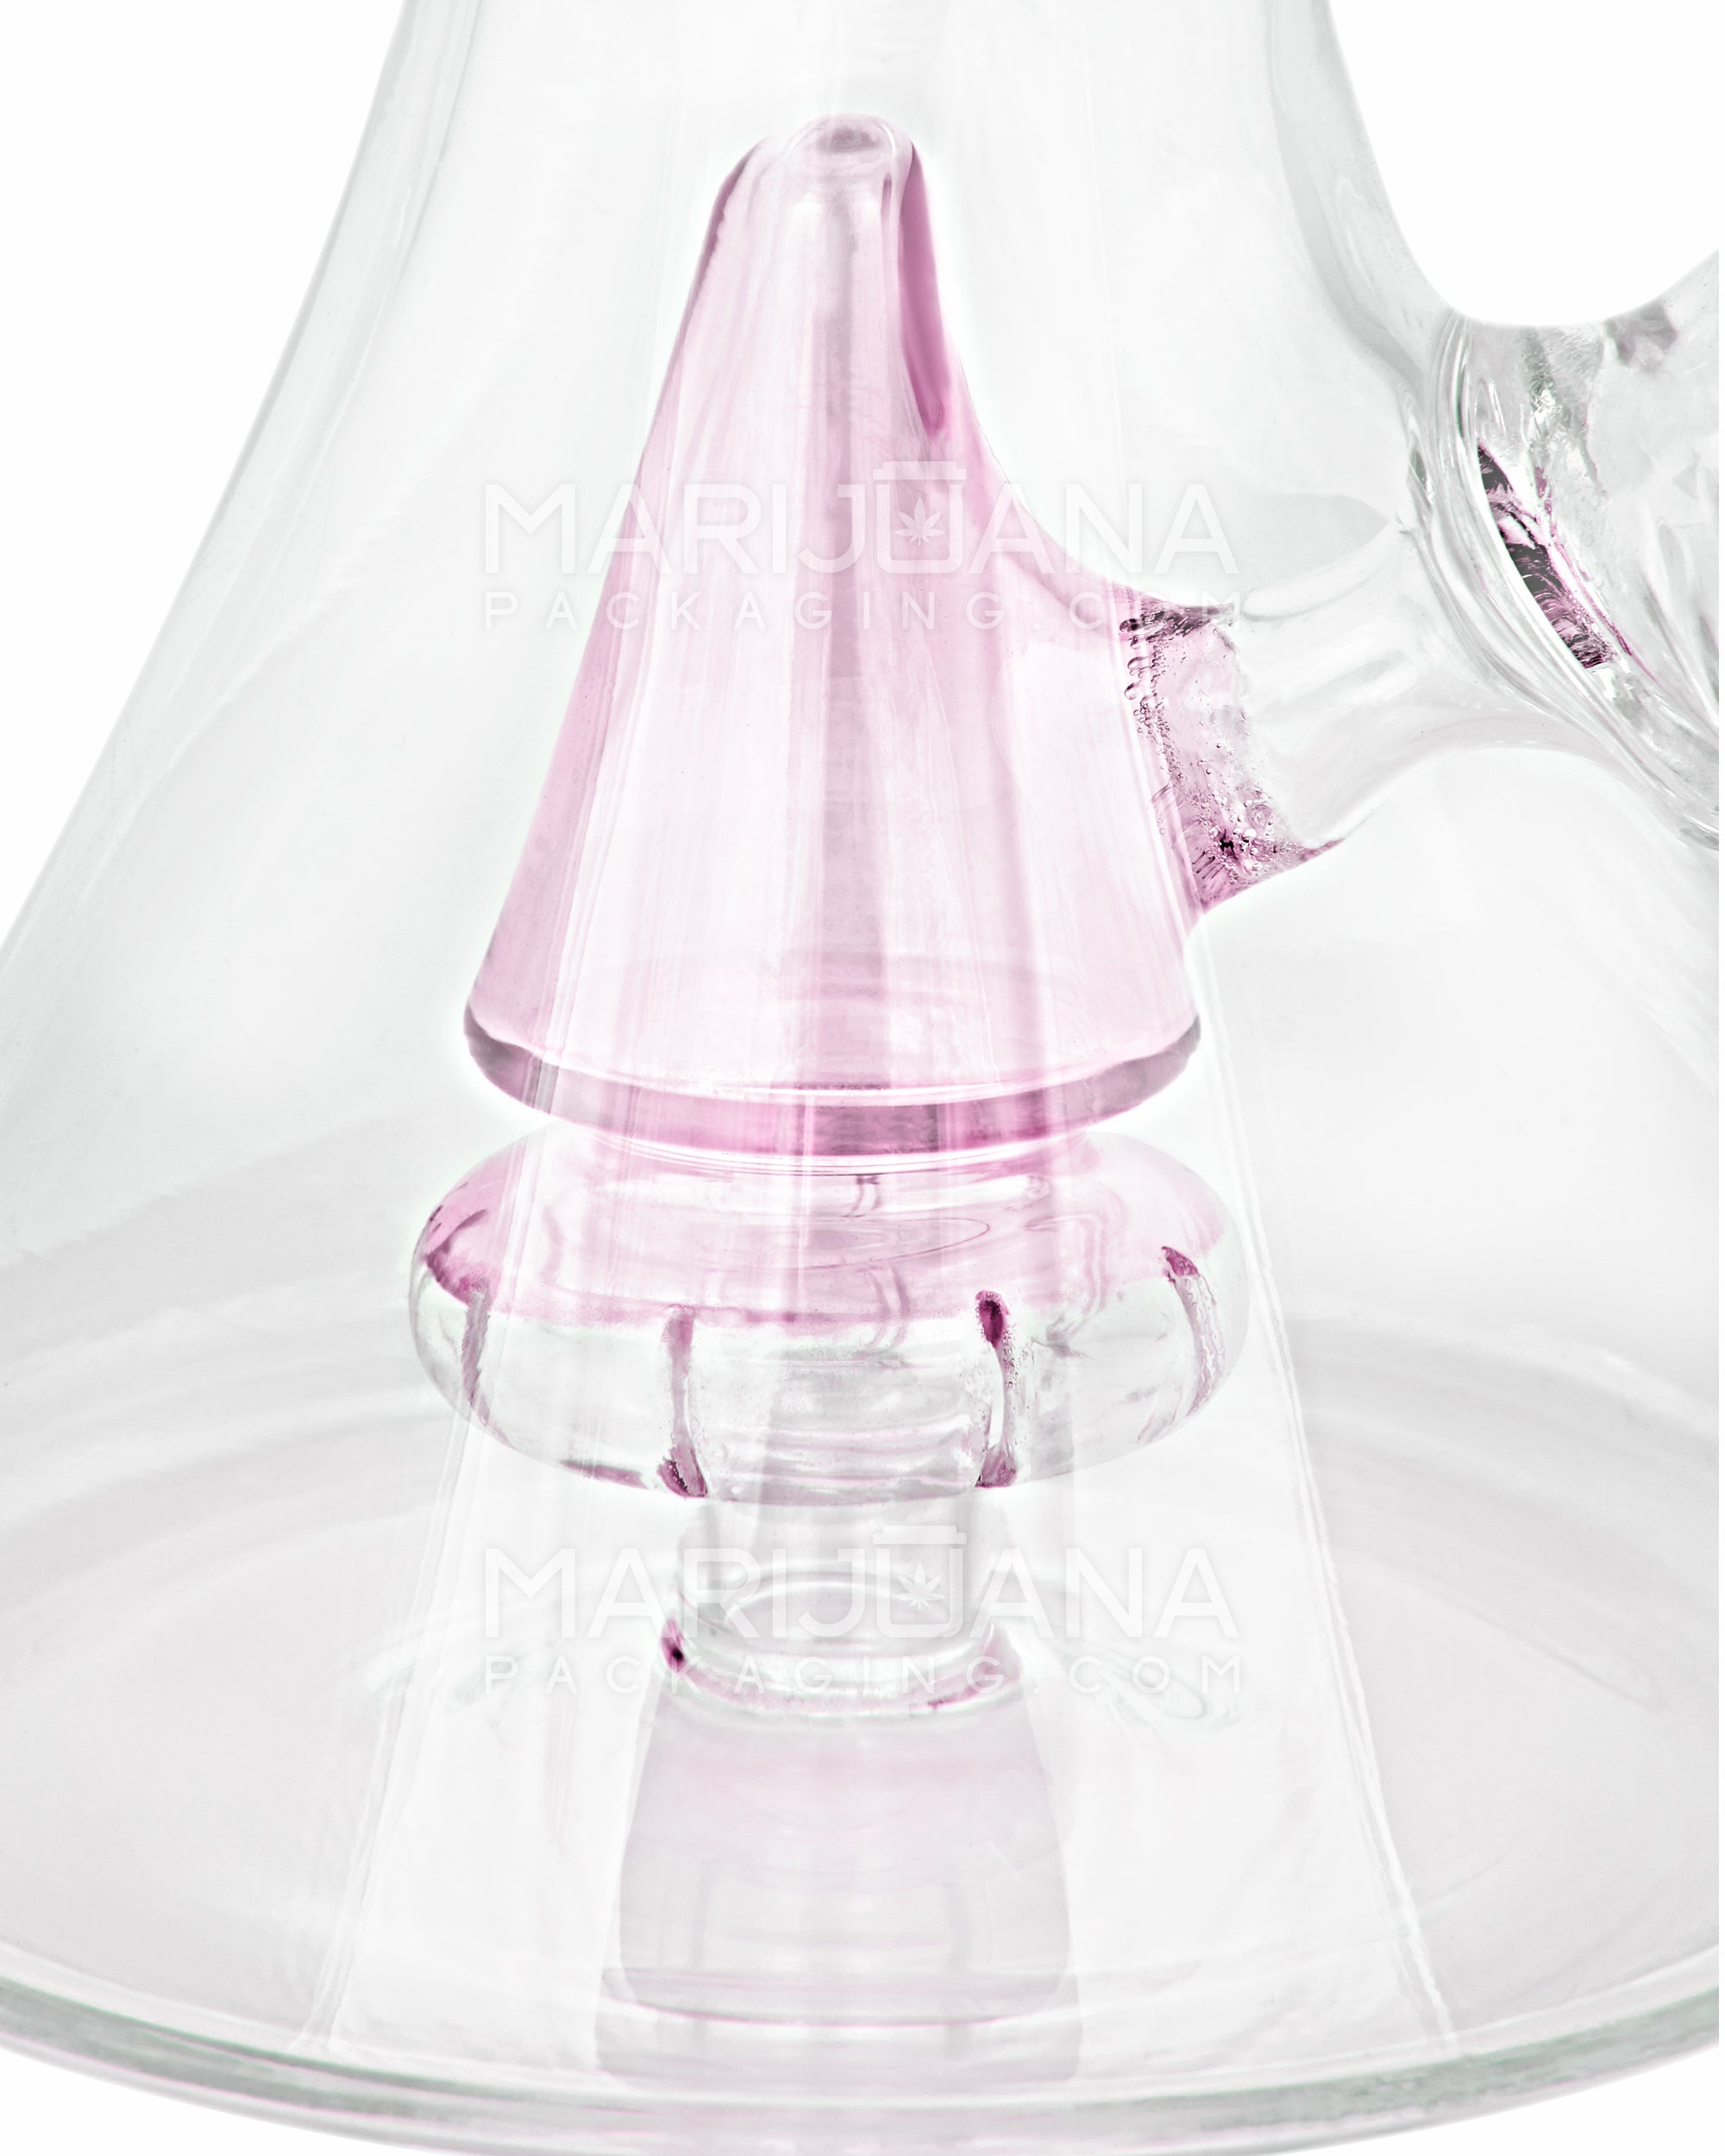 Ribbed Neck Showerhead Perc Glass Beaker Water Pipe | 8.5in Tall - 14mm Bowl - Pink - 3